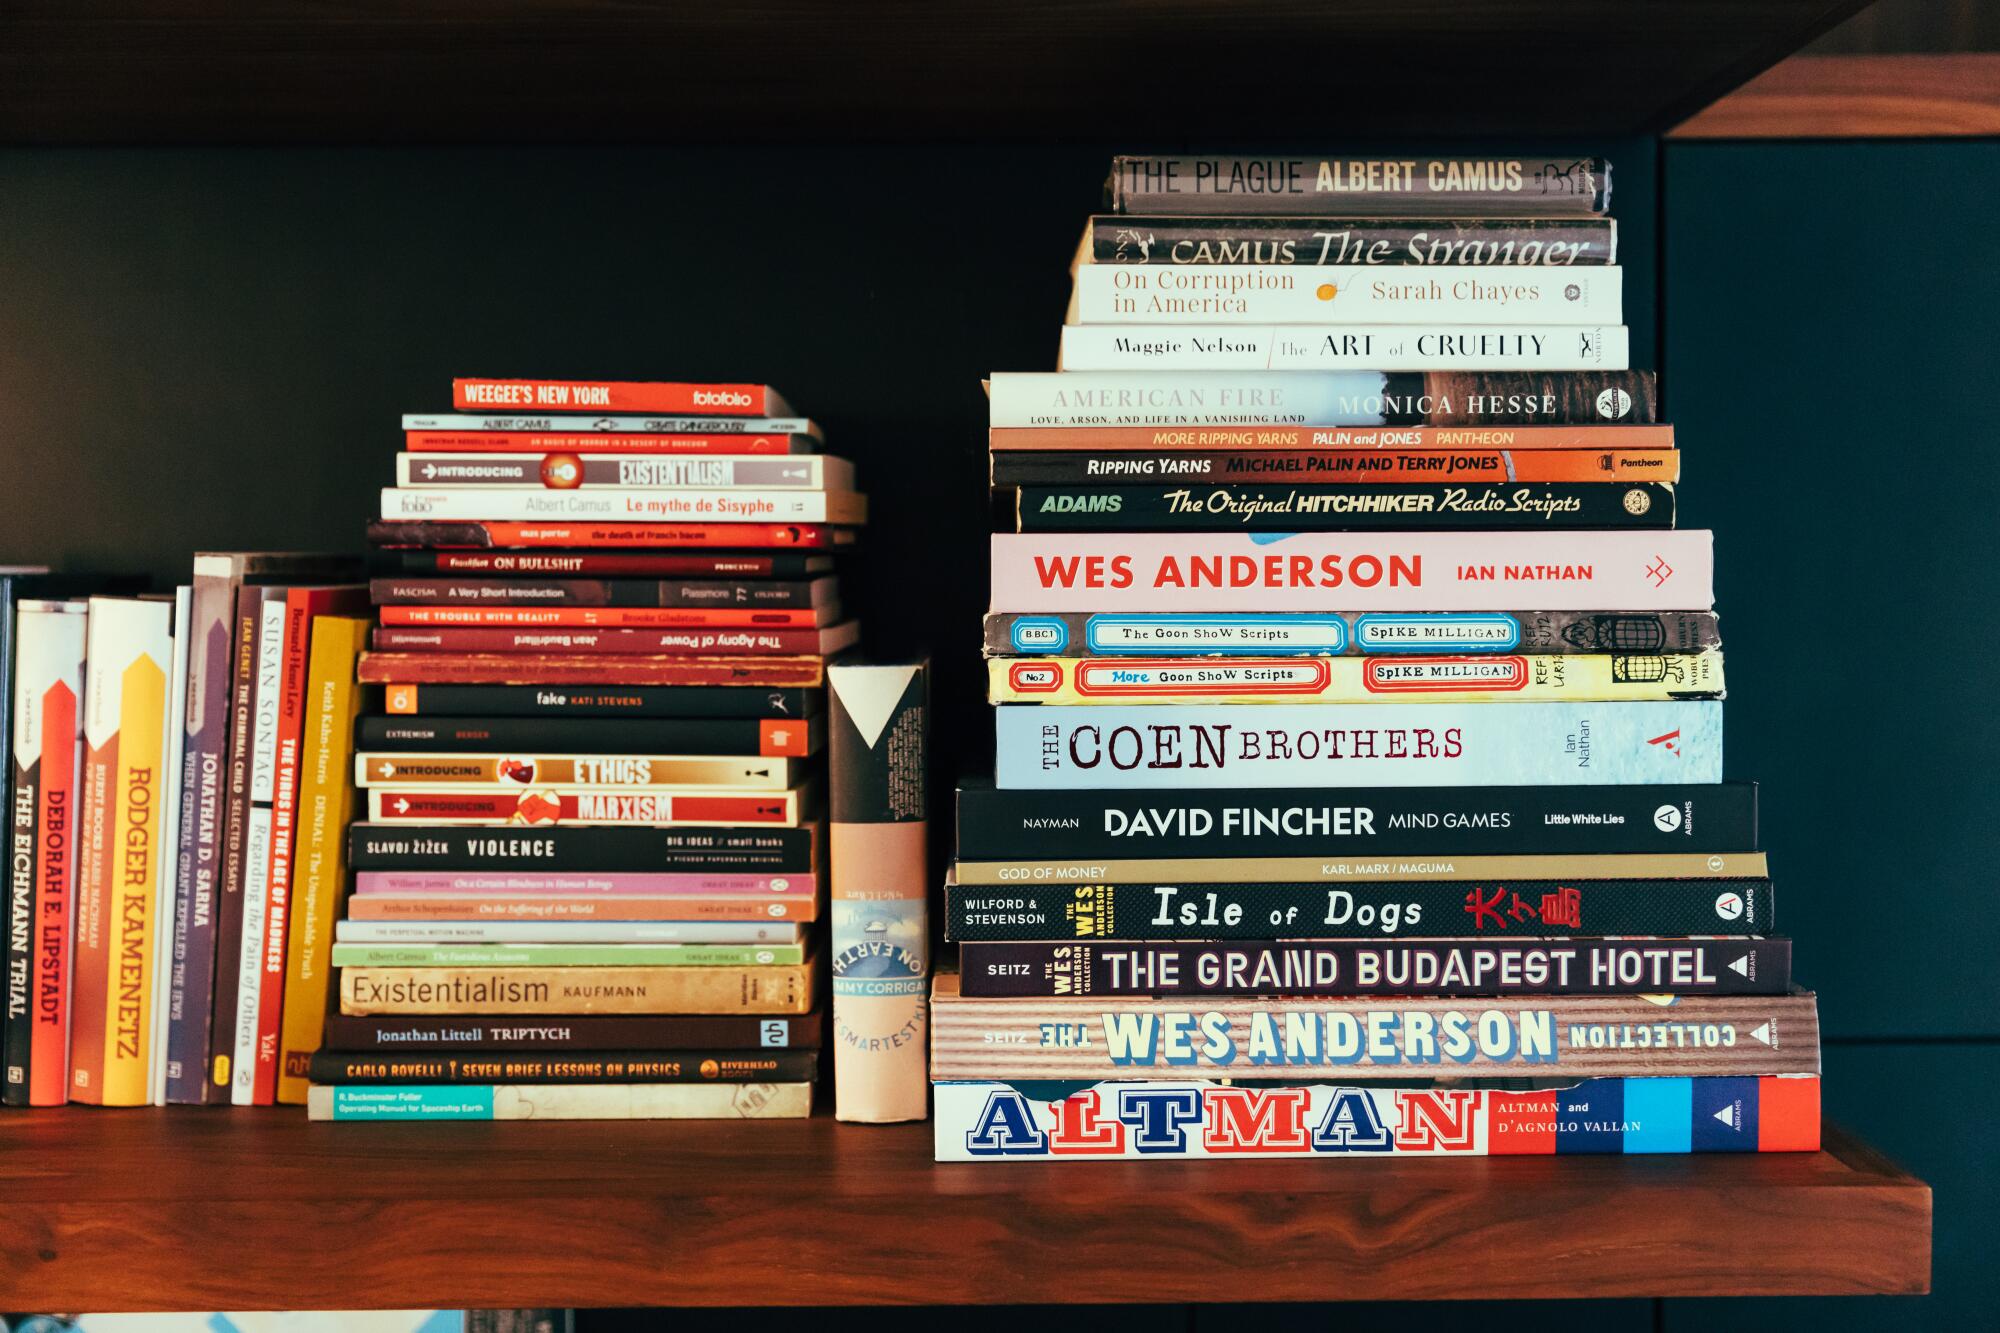 Books with titles like "Existentialism," "Marxism" and "Wes Anderson" stacked on a bookshelf.